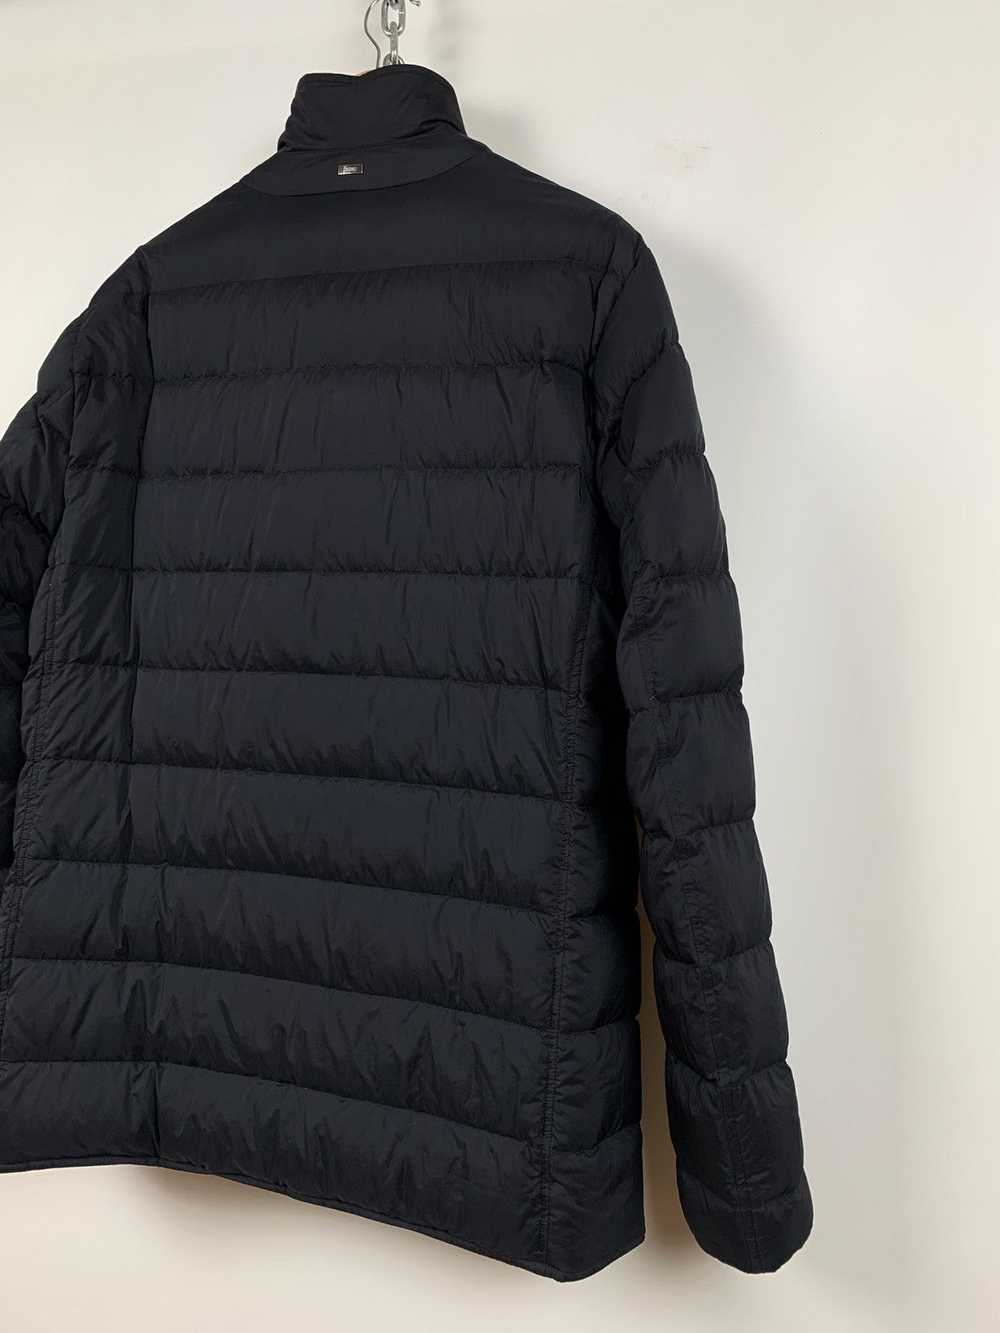 Herno Herno Navy Blue Quilted Down Jacket - image 12